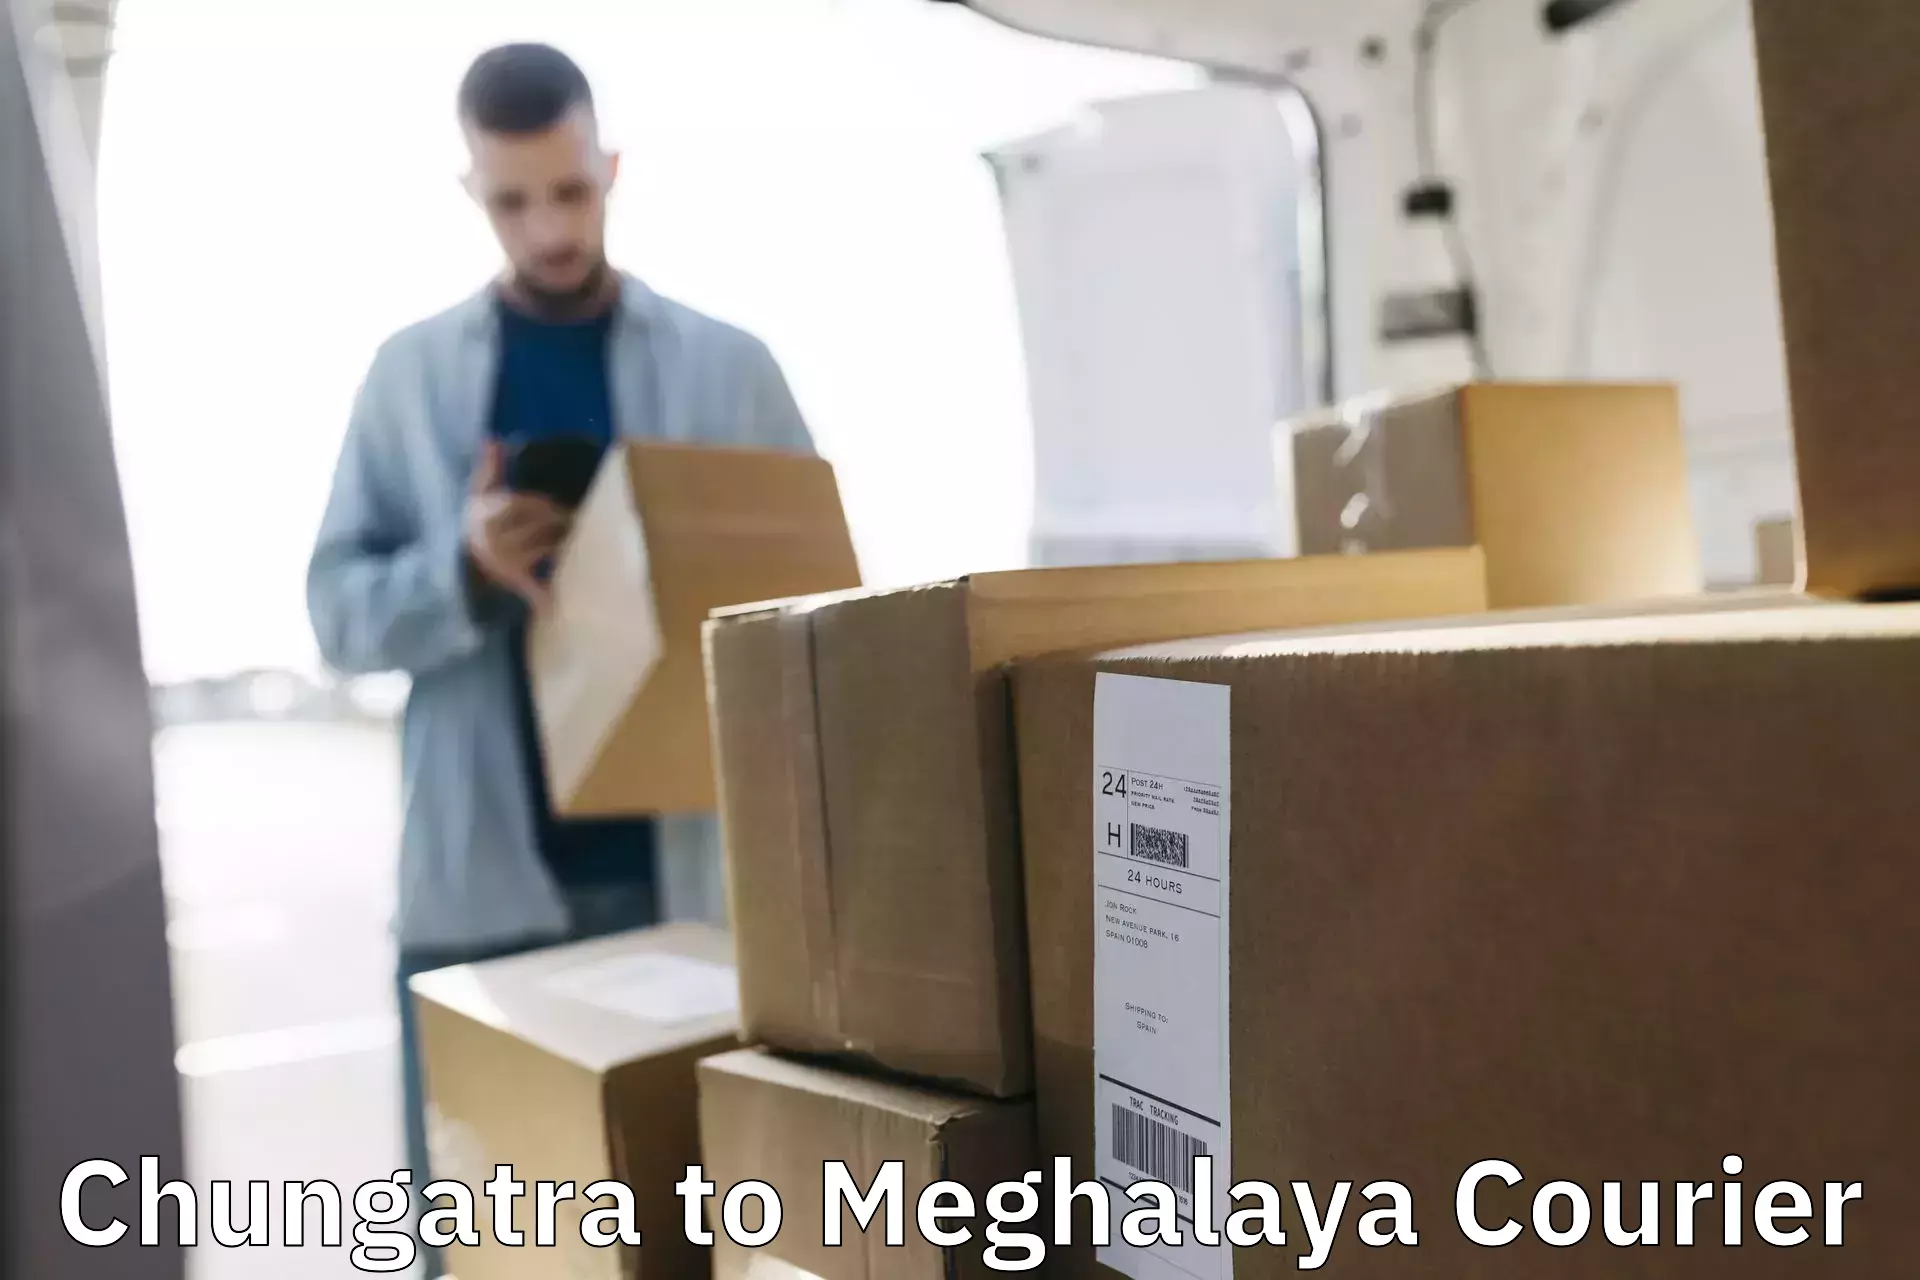 Efficient parcel delivery Chungatra to Meghalaya